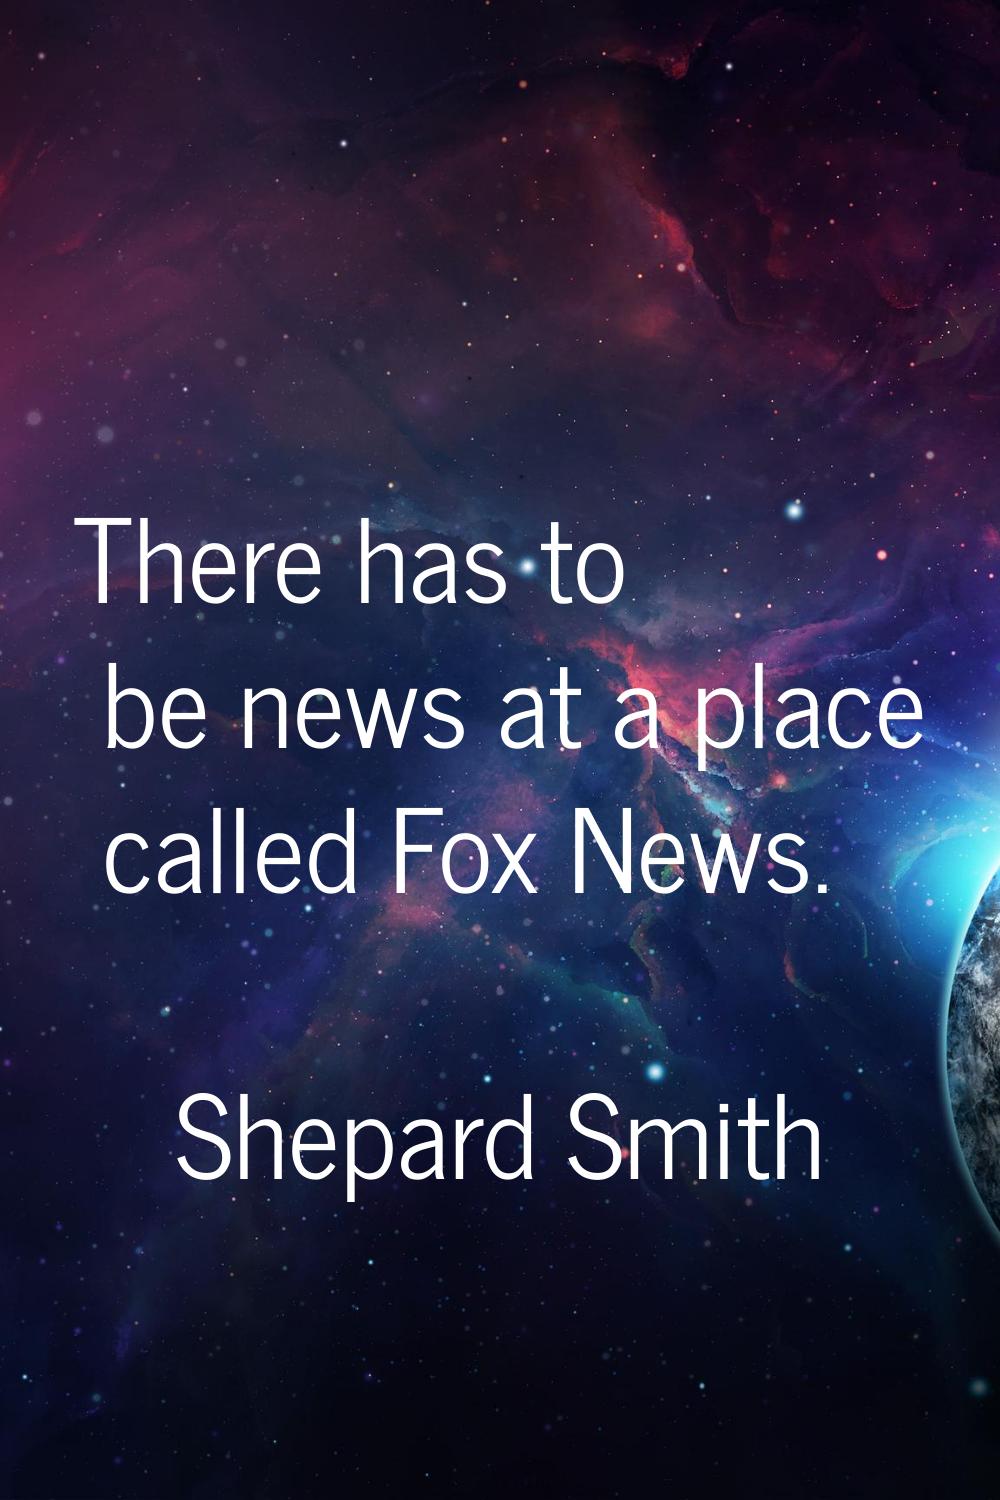 There has to be news at a place called Fox News.